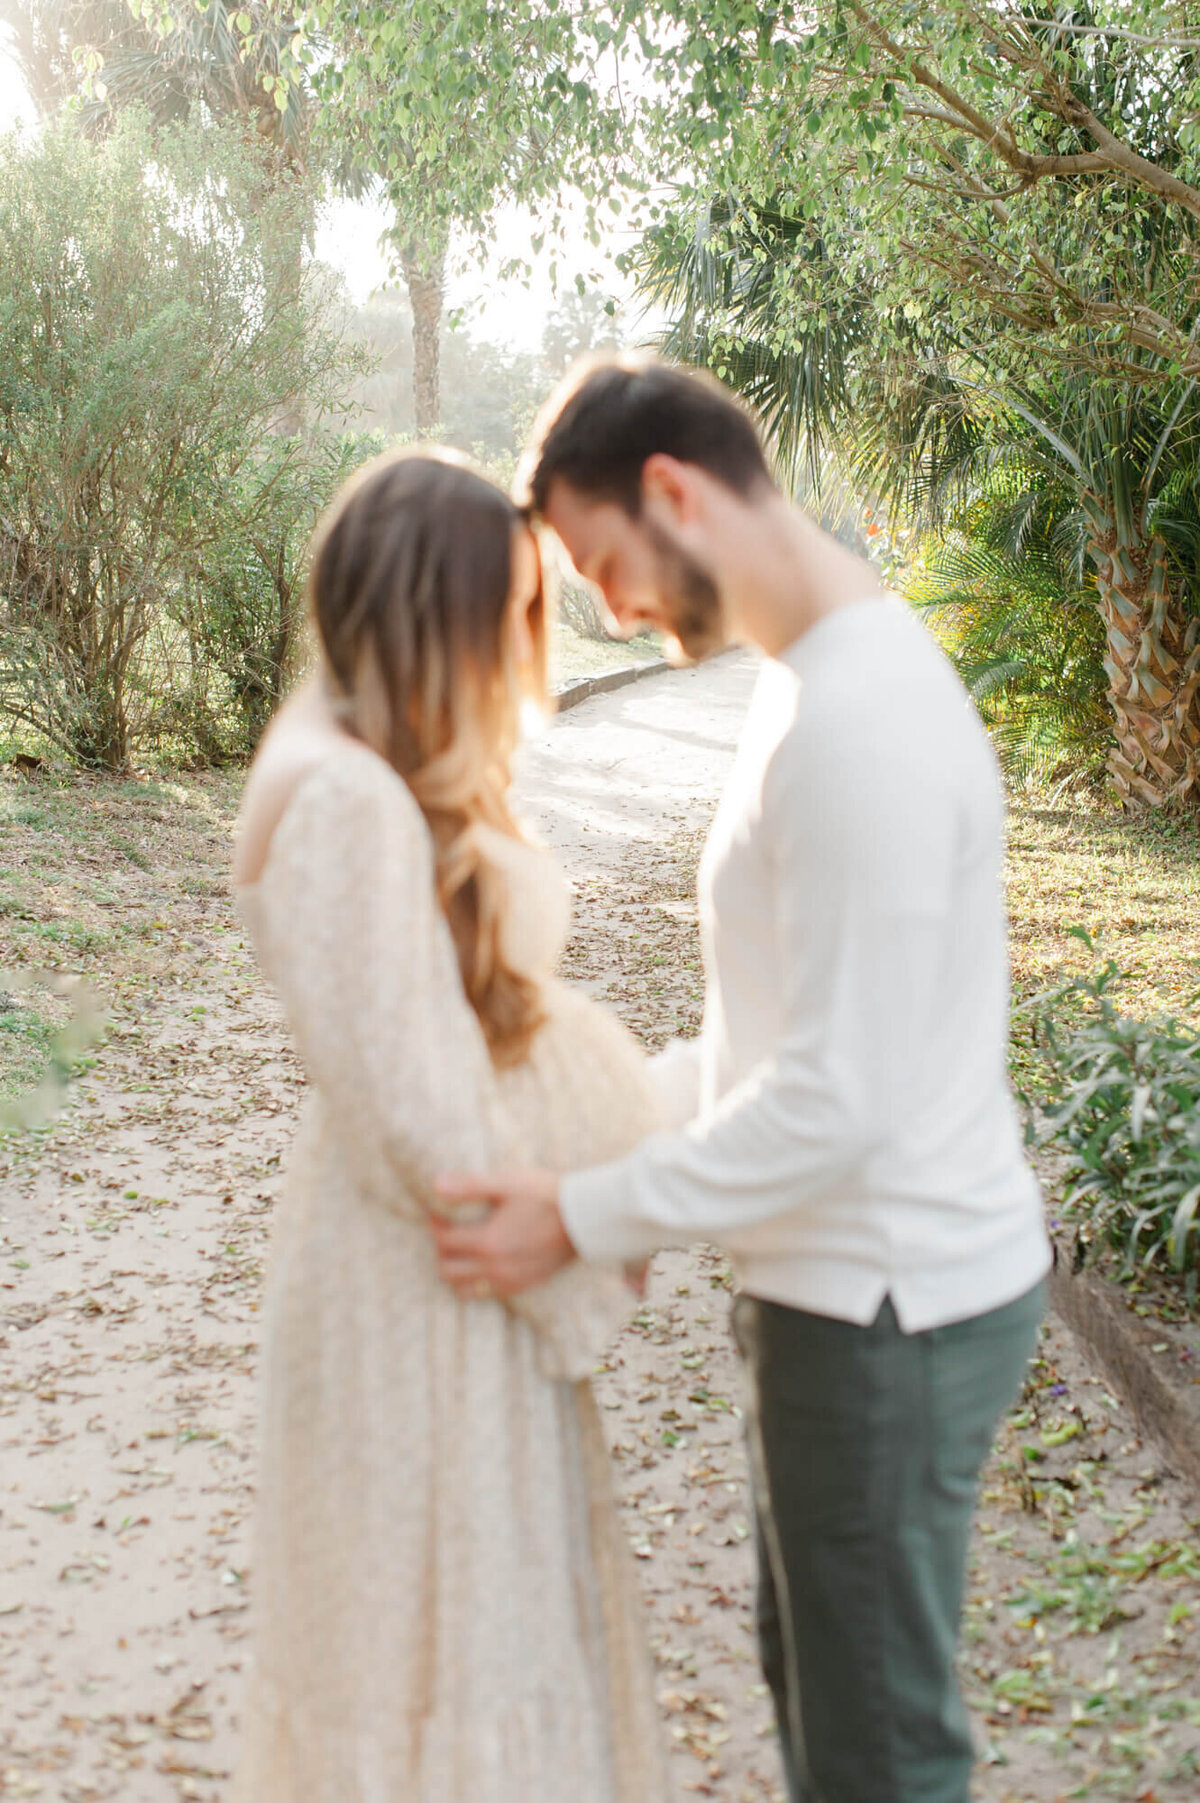 Couple is blurred while the stunning background is in focus of mom and dad holding moms belly on this beautiful greenery path